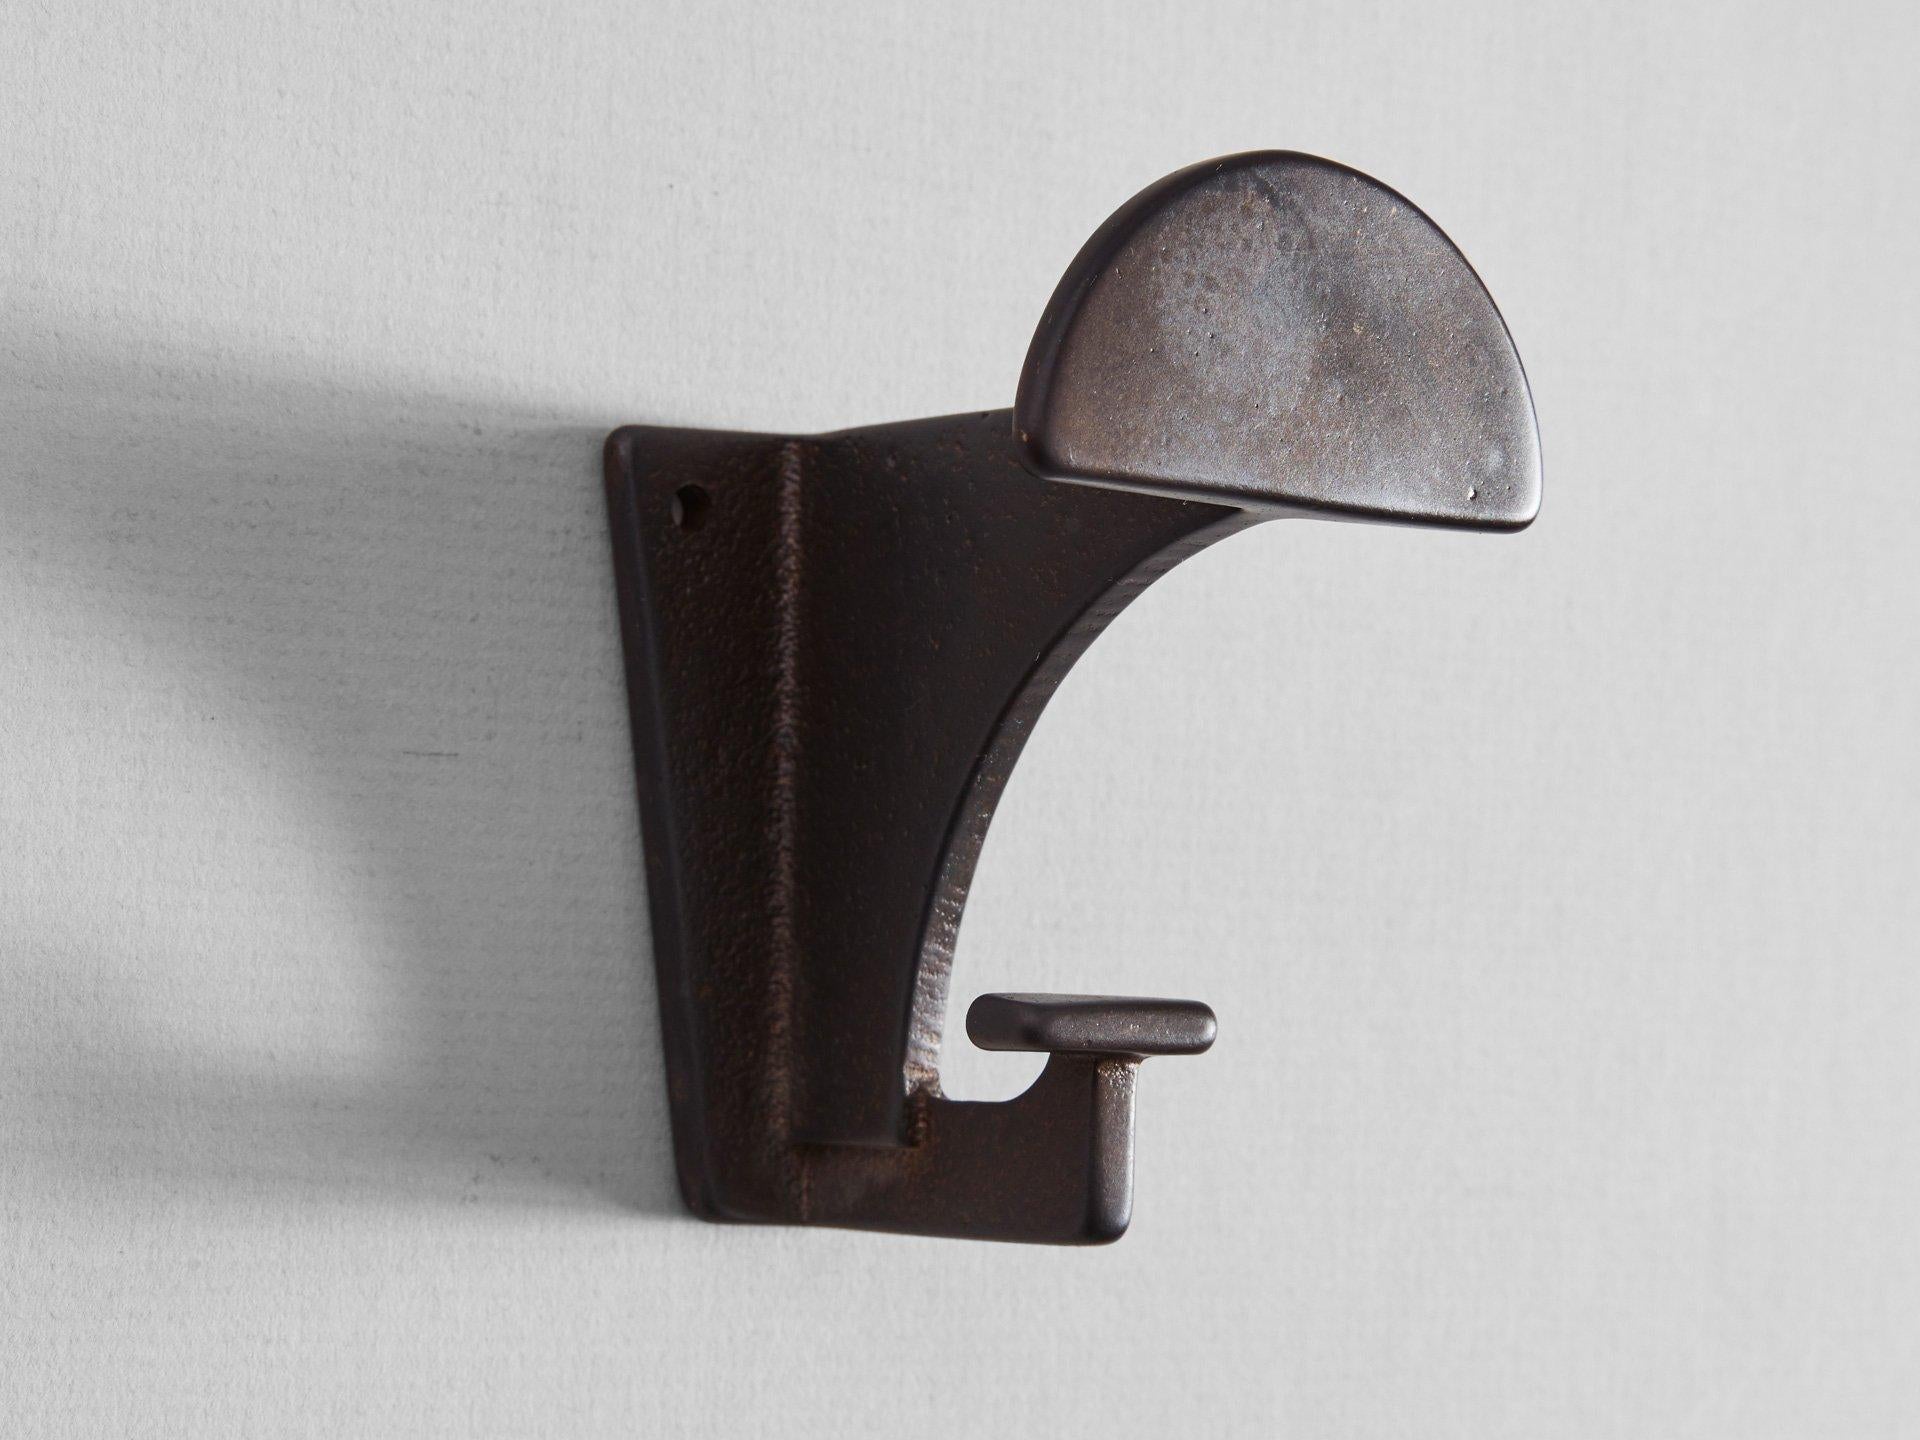 6 dark bronze contemporary Hooks by Henry Wilson
The blackened compass hook is made, finished and polished in Sydney, Australia using sand-casted gunmetal bronze. For its size, it can bear a surprisingly substantial heft.  

Sand-casting involves